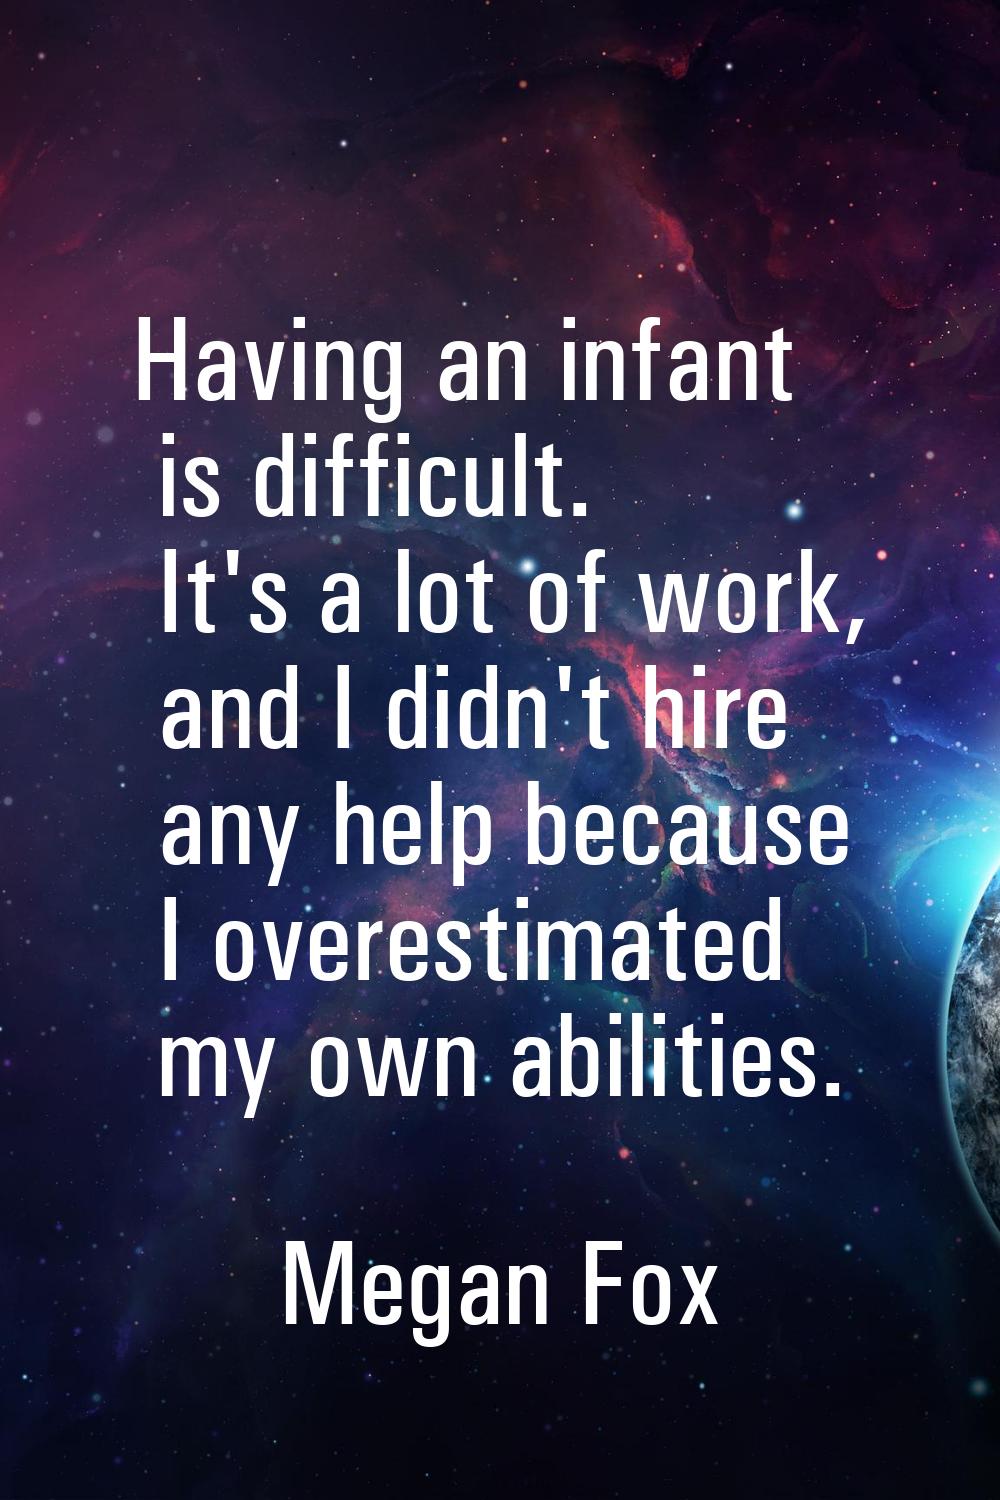 Having an infant is difficult. It's a lot of work, and I didn't hire any help because I overestimat